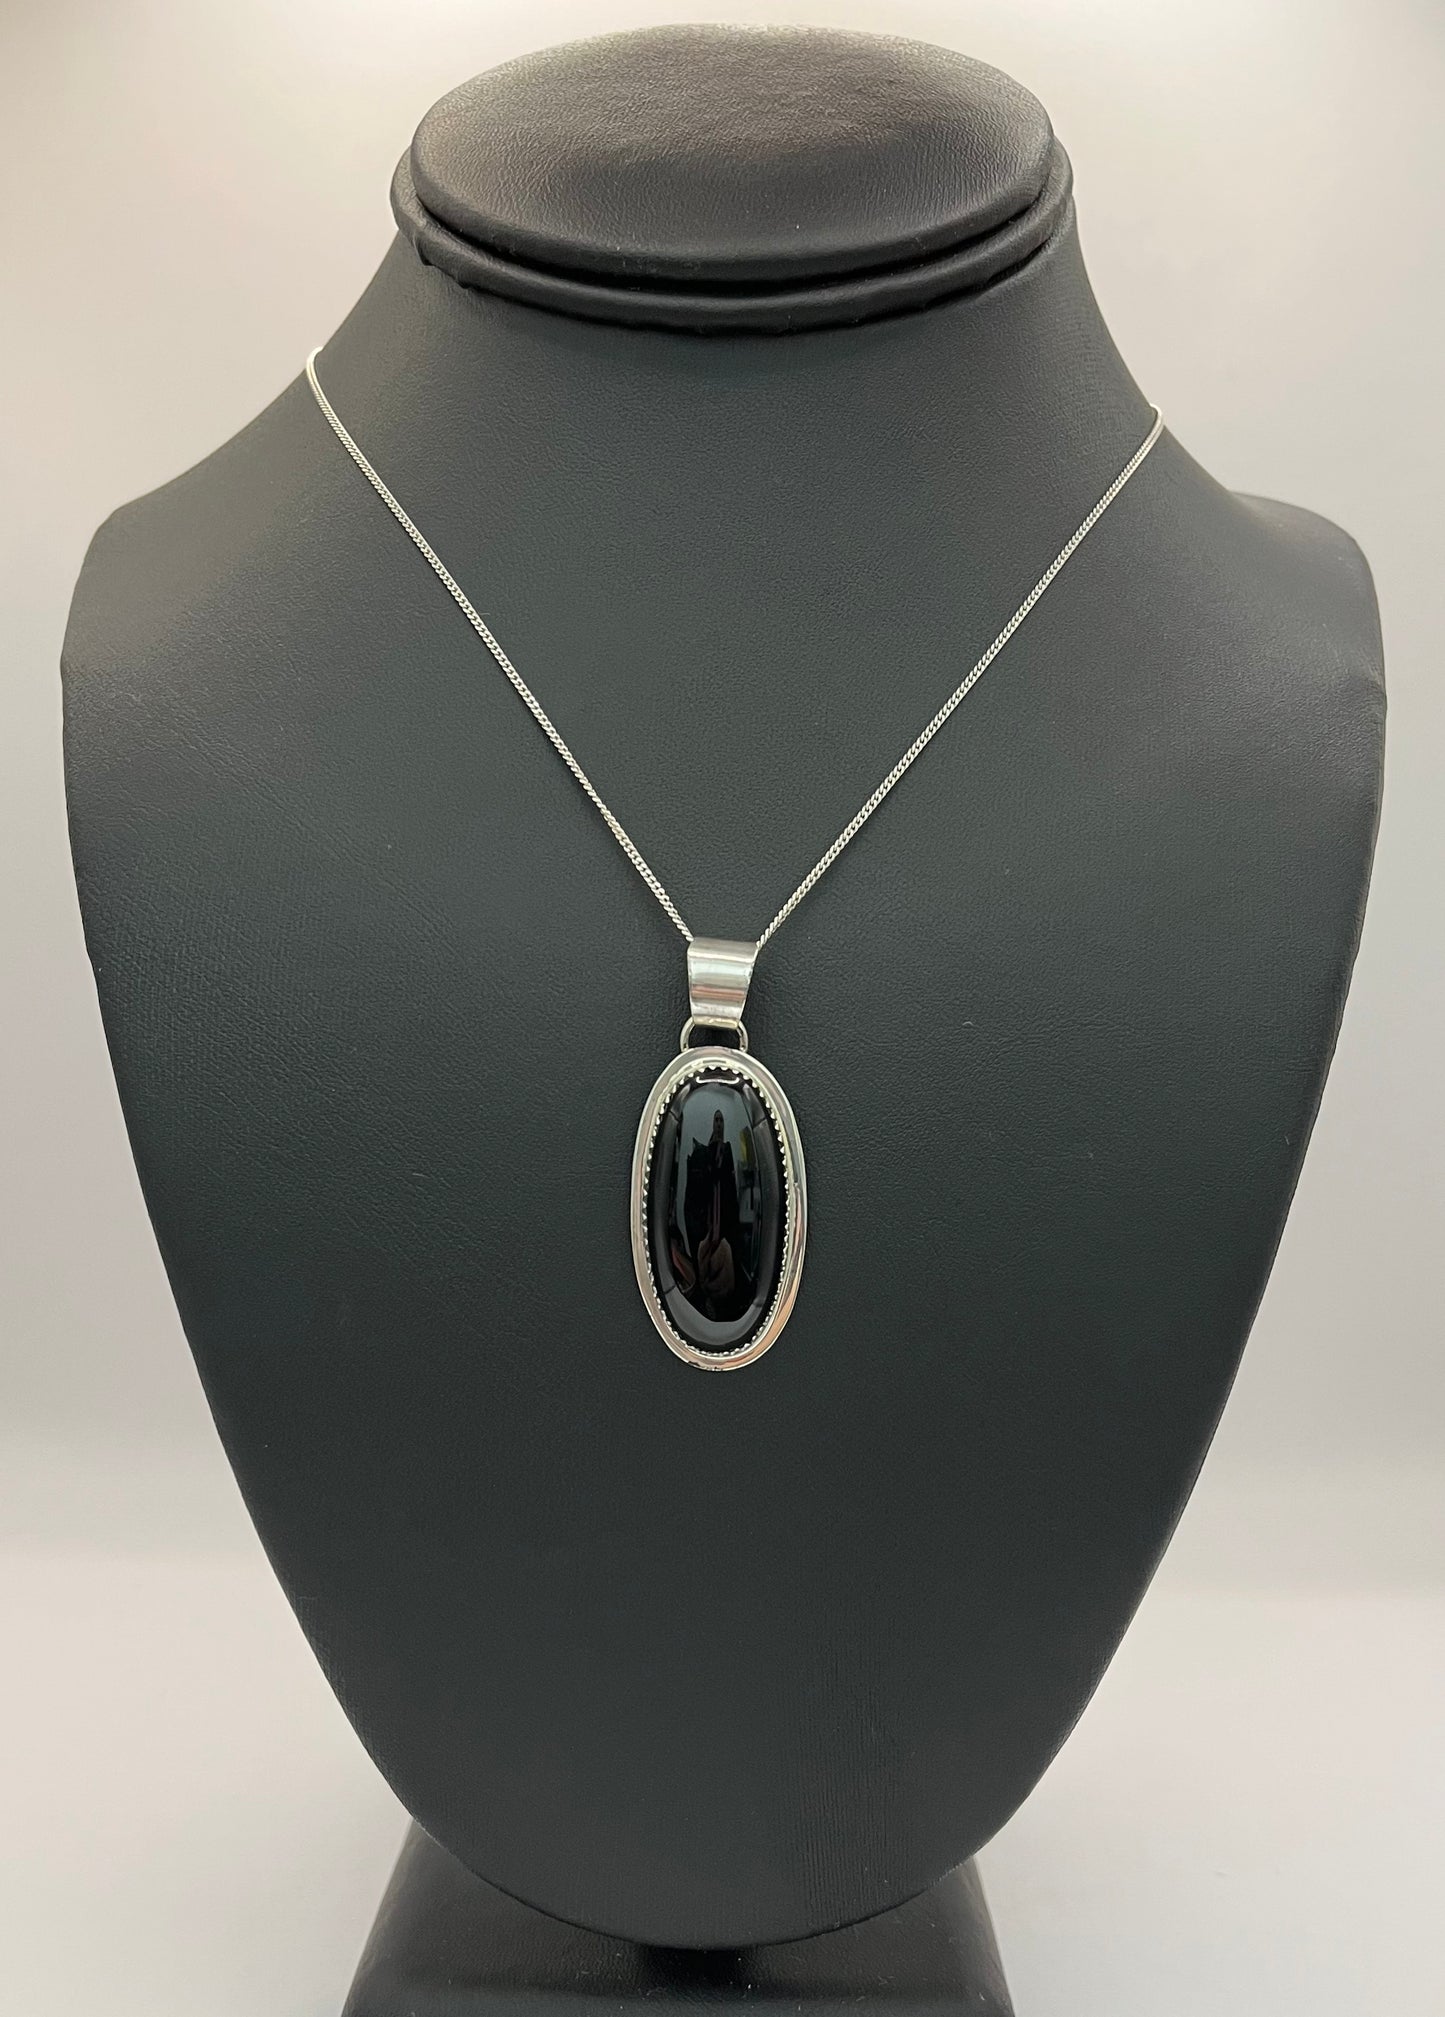 Large Oval Onyx and Sterling Silver Pendant with Chain